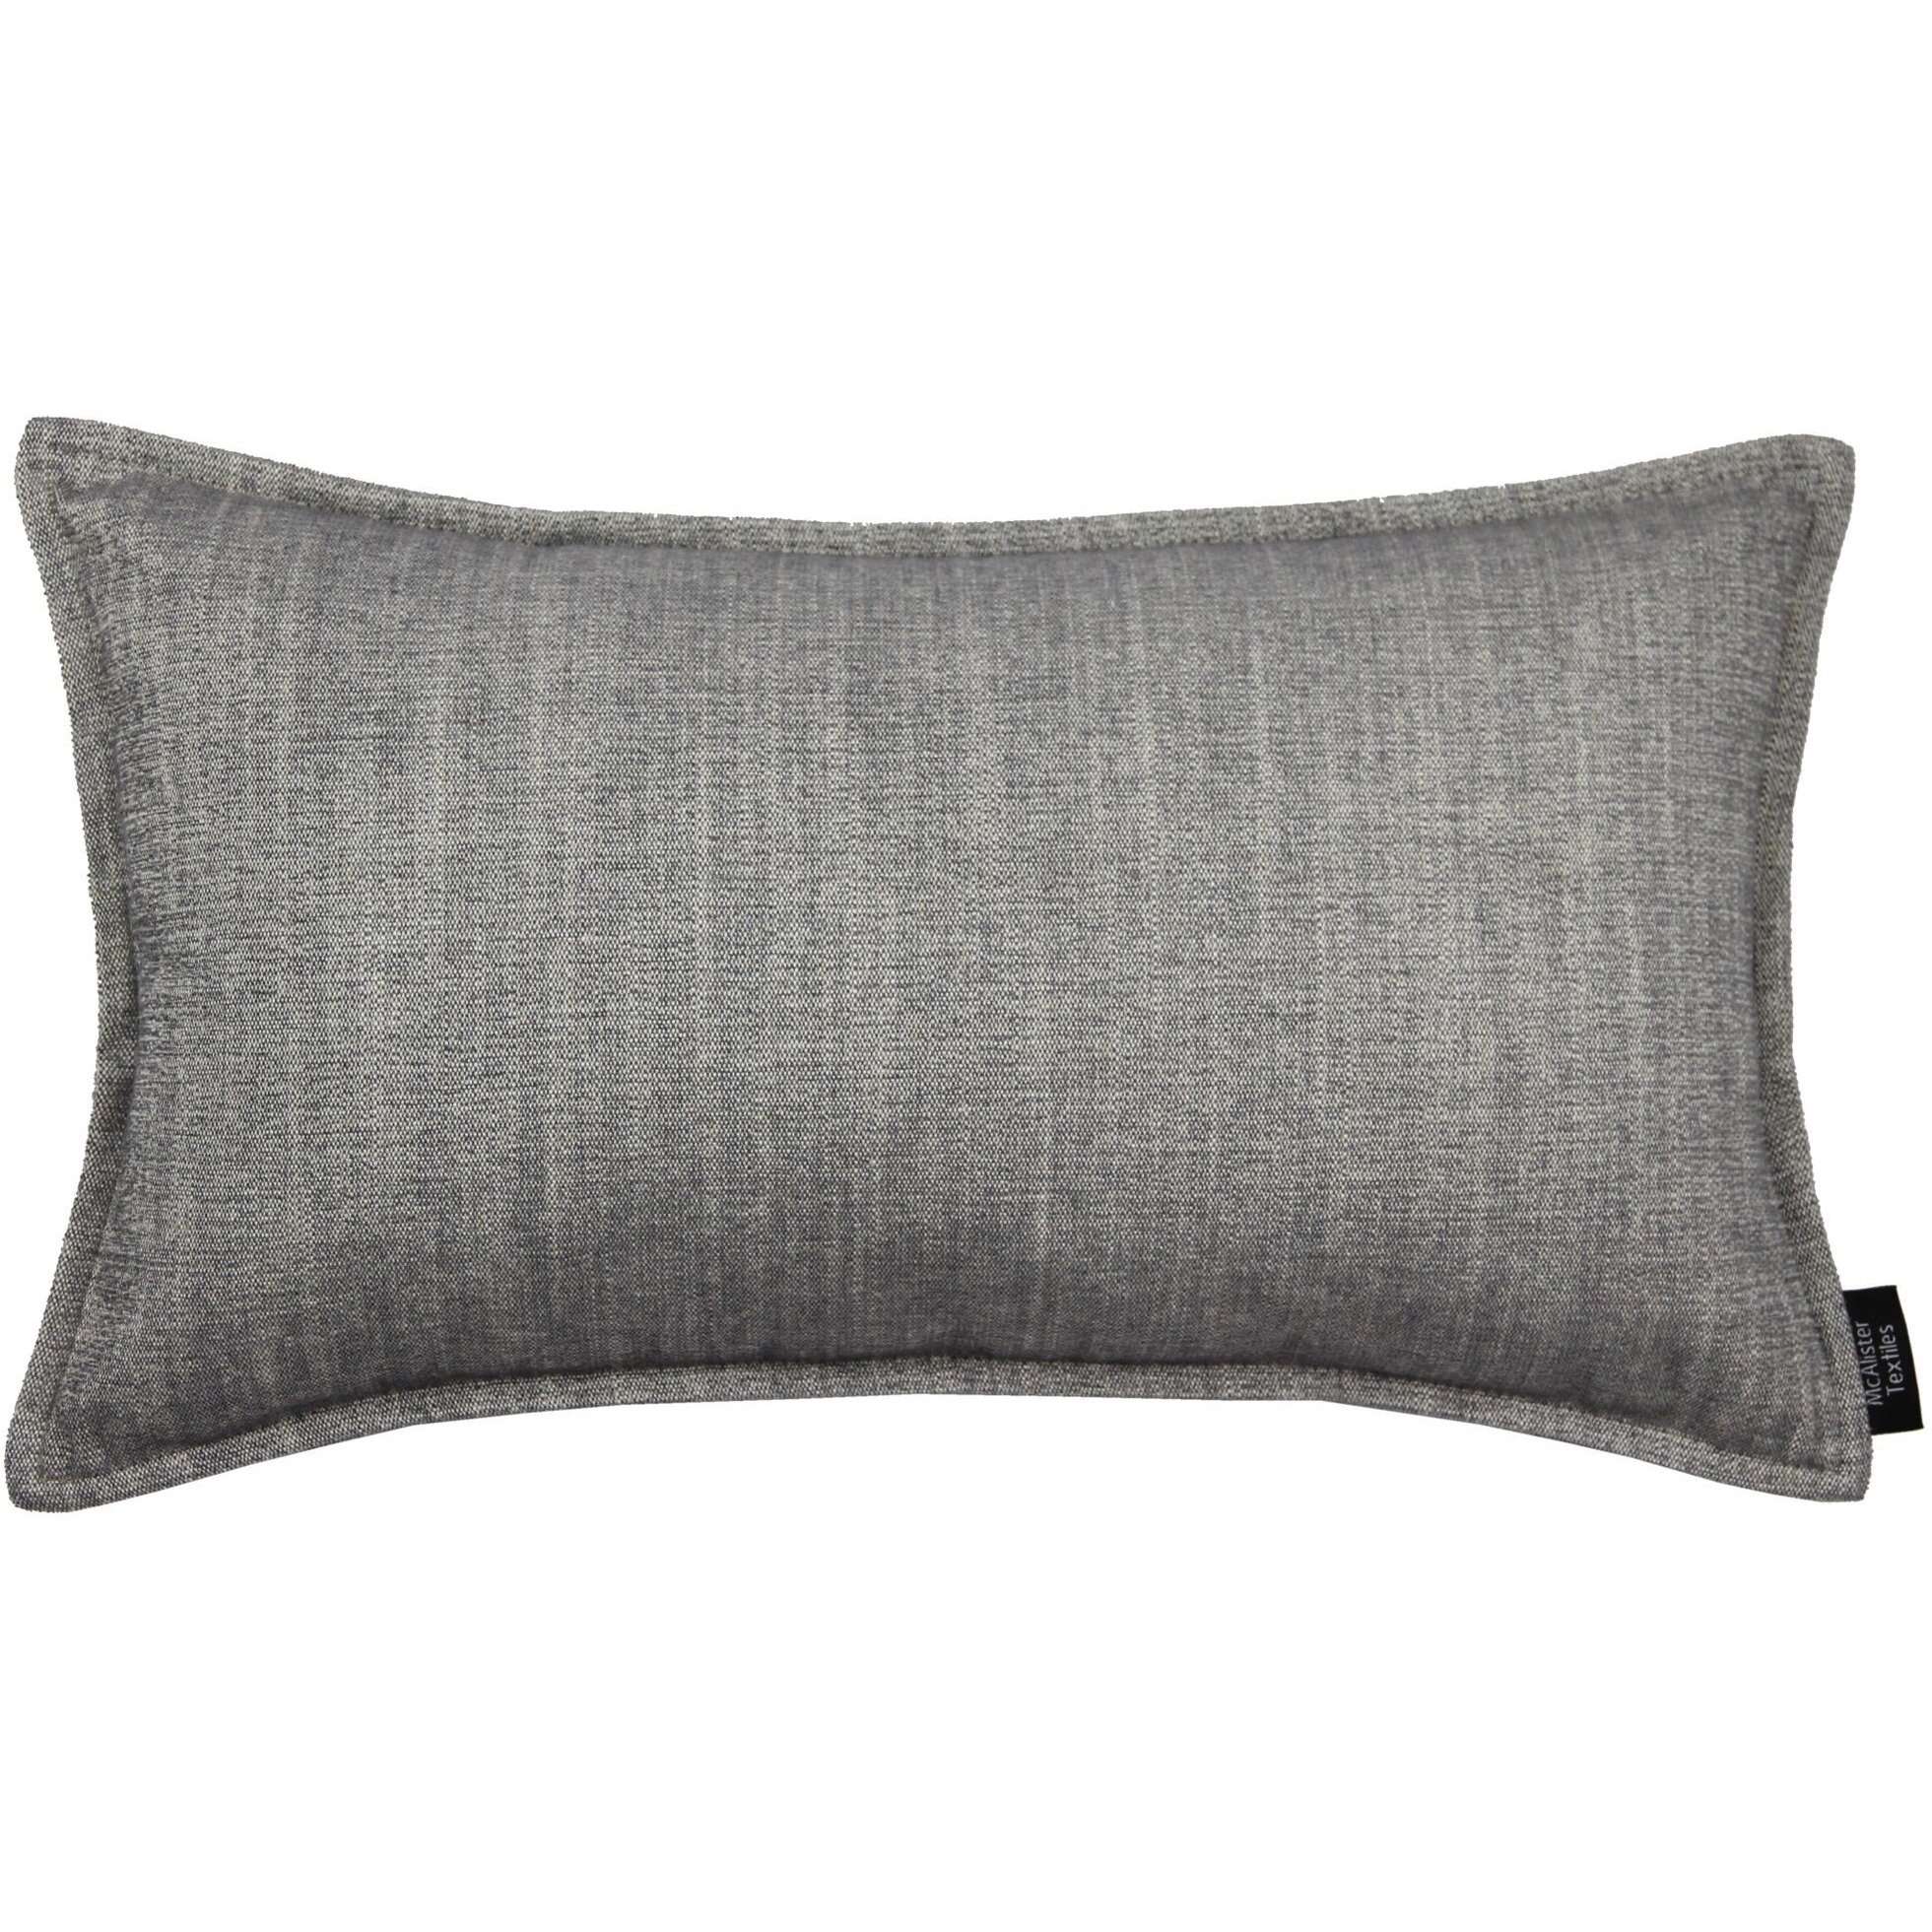 McAlister Textiles Rhumba Charcoal Grey Pillow Pillow Cover Only 50cm x 30cm 